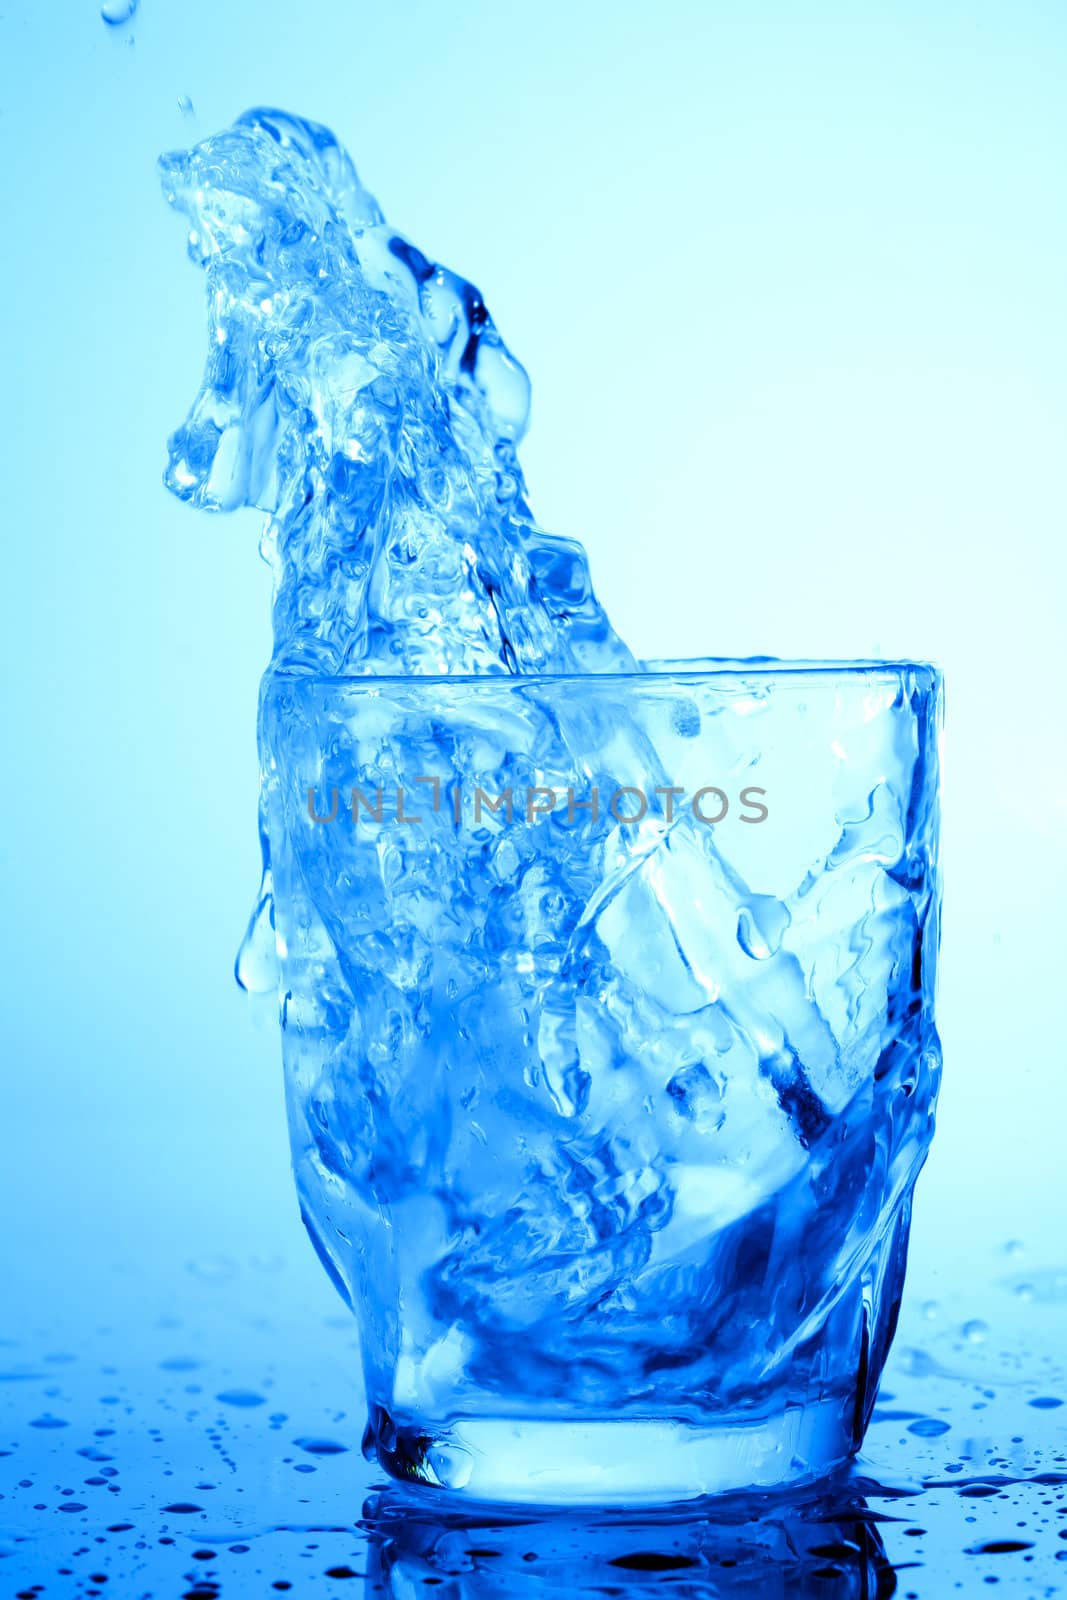 Stock photo: food theme: image of water splash in blue glass